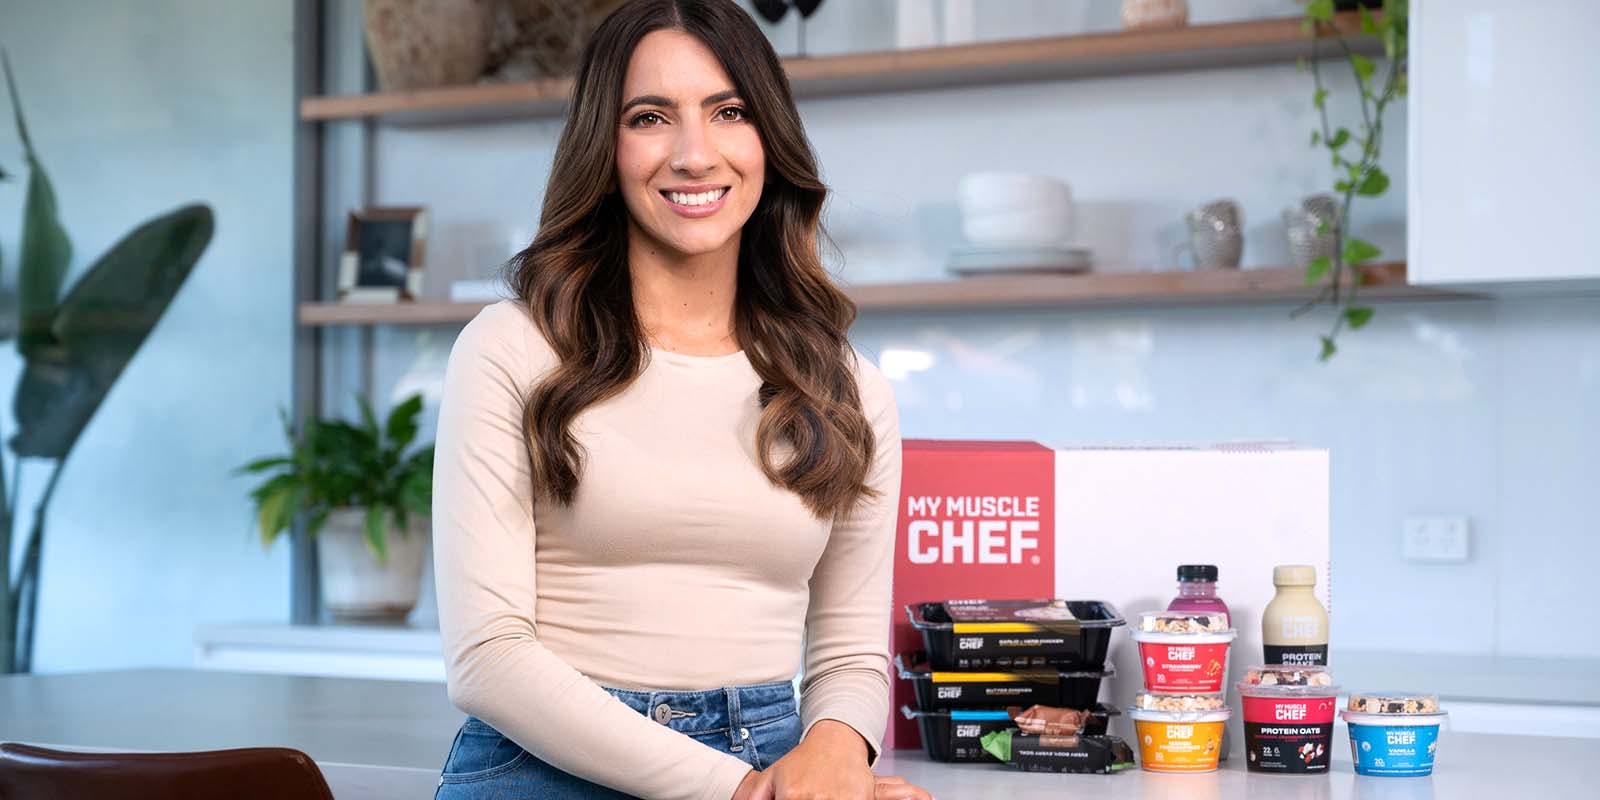 Ria - My Muscle Chef Accredited Dietitian and Nutritionist with my muscle chef meals